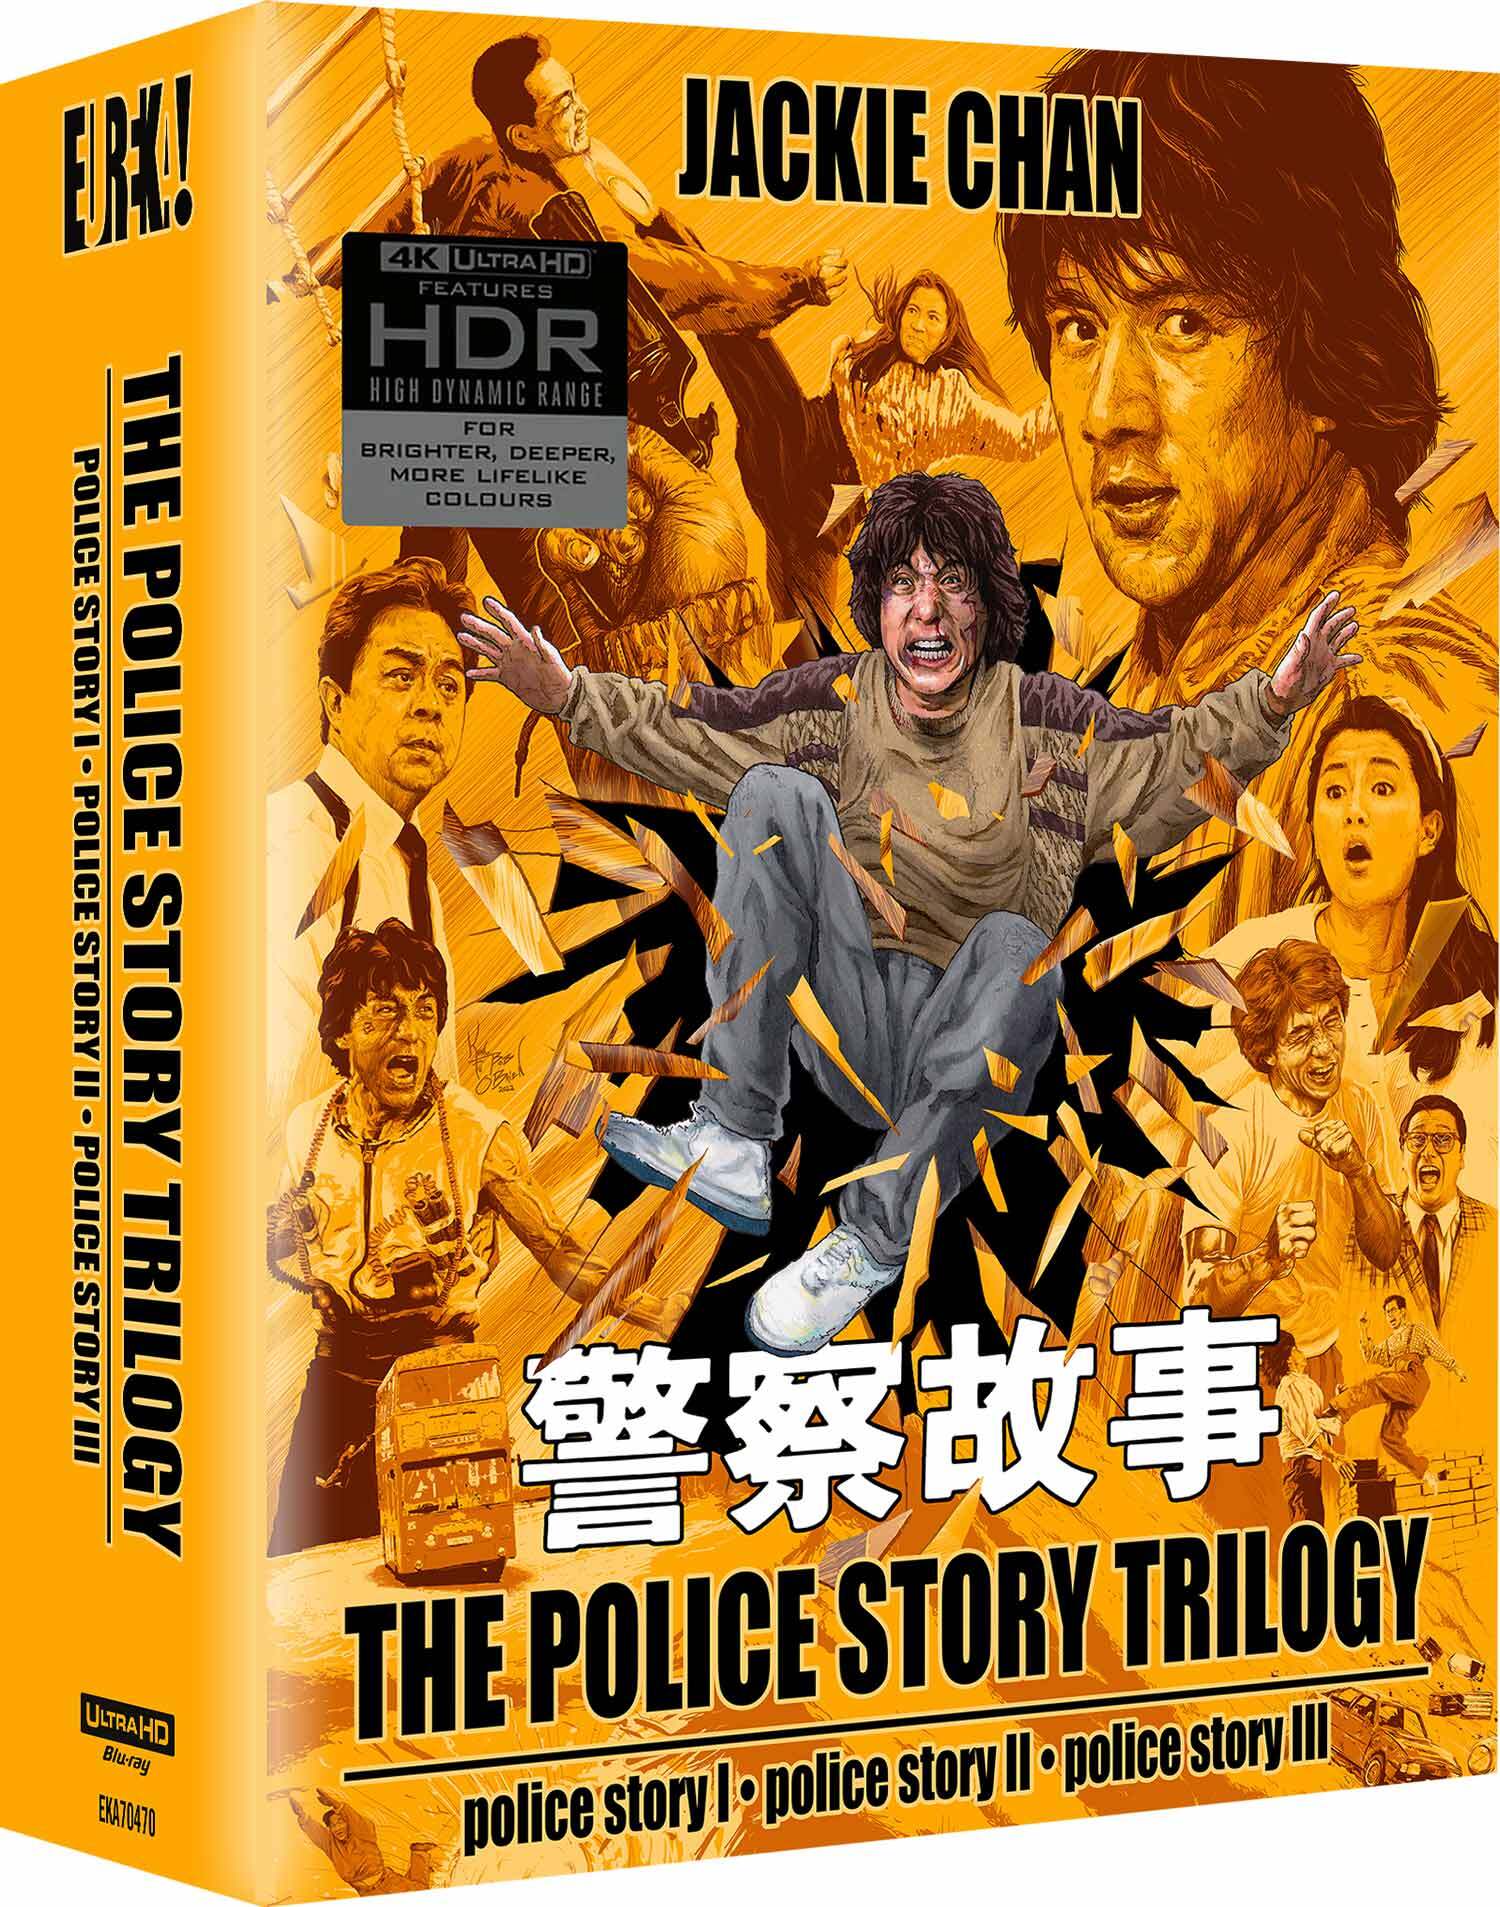 THE POLICE STORY TRILOGY (REGION FREE IMPORT - LIMITED EDITION) 4K UHD